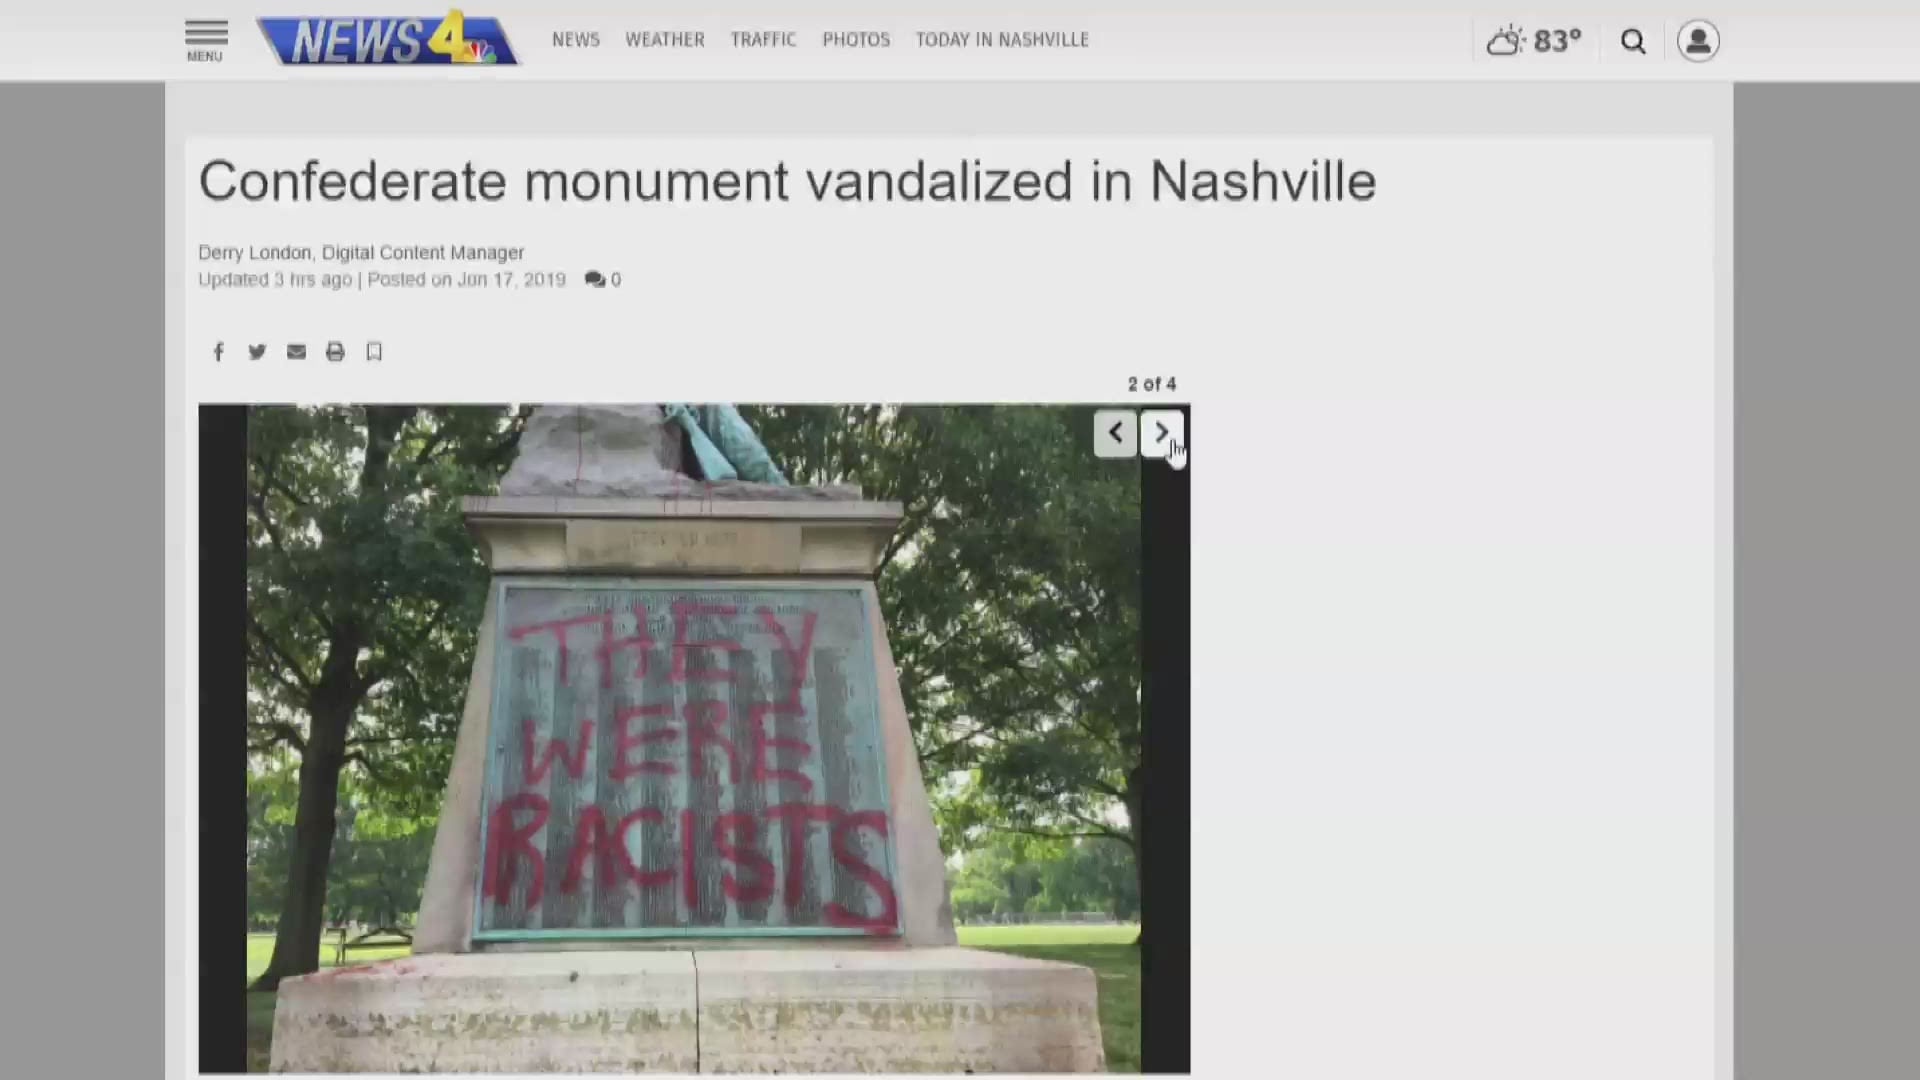 Police Monday morning were alerted to graffiti that had been spray-painted on the monument, and large blots of red paint thrown onto parts of the monument.